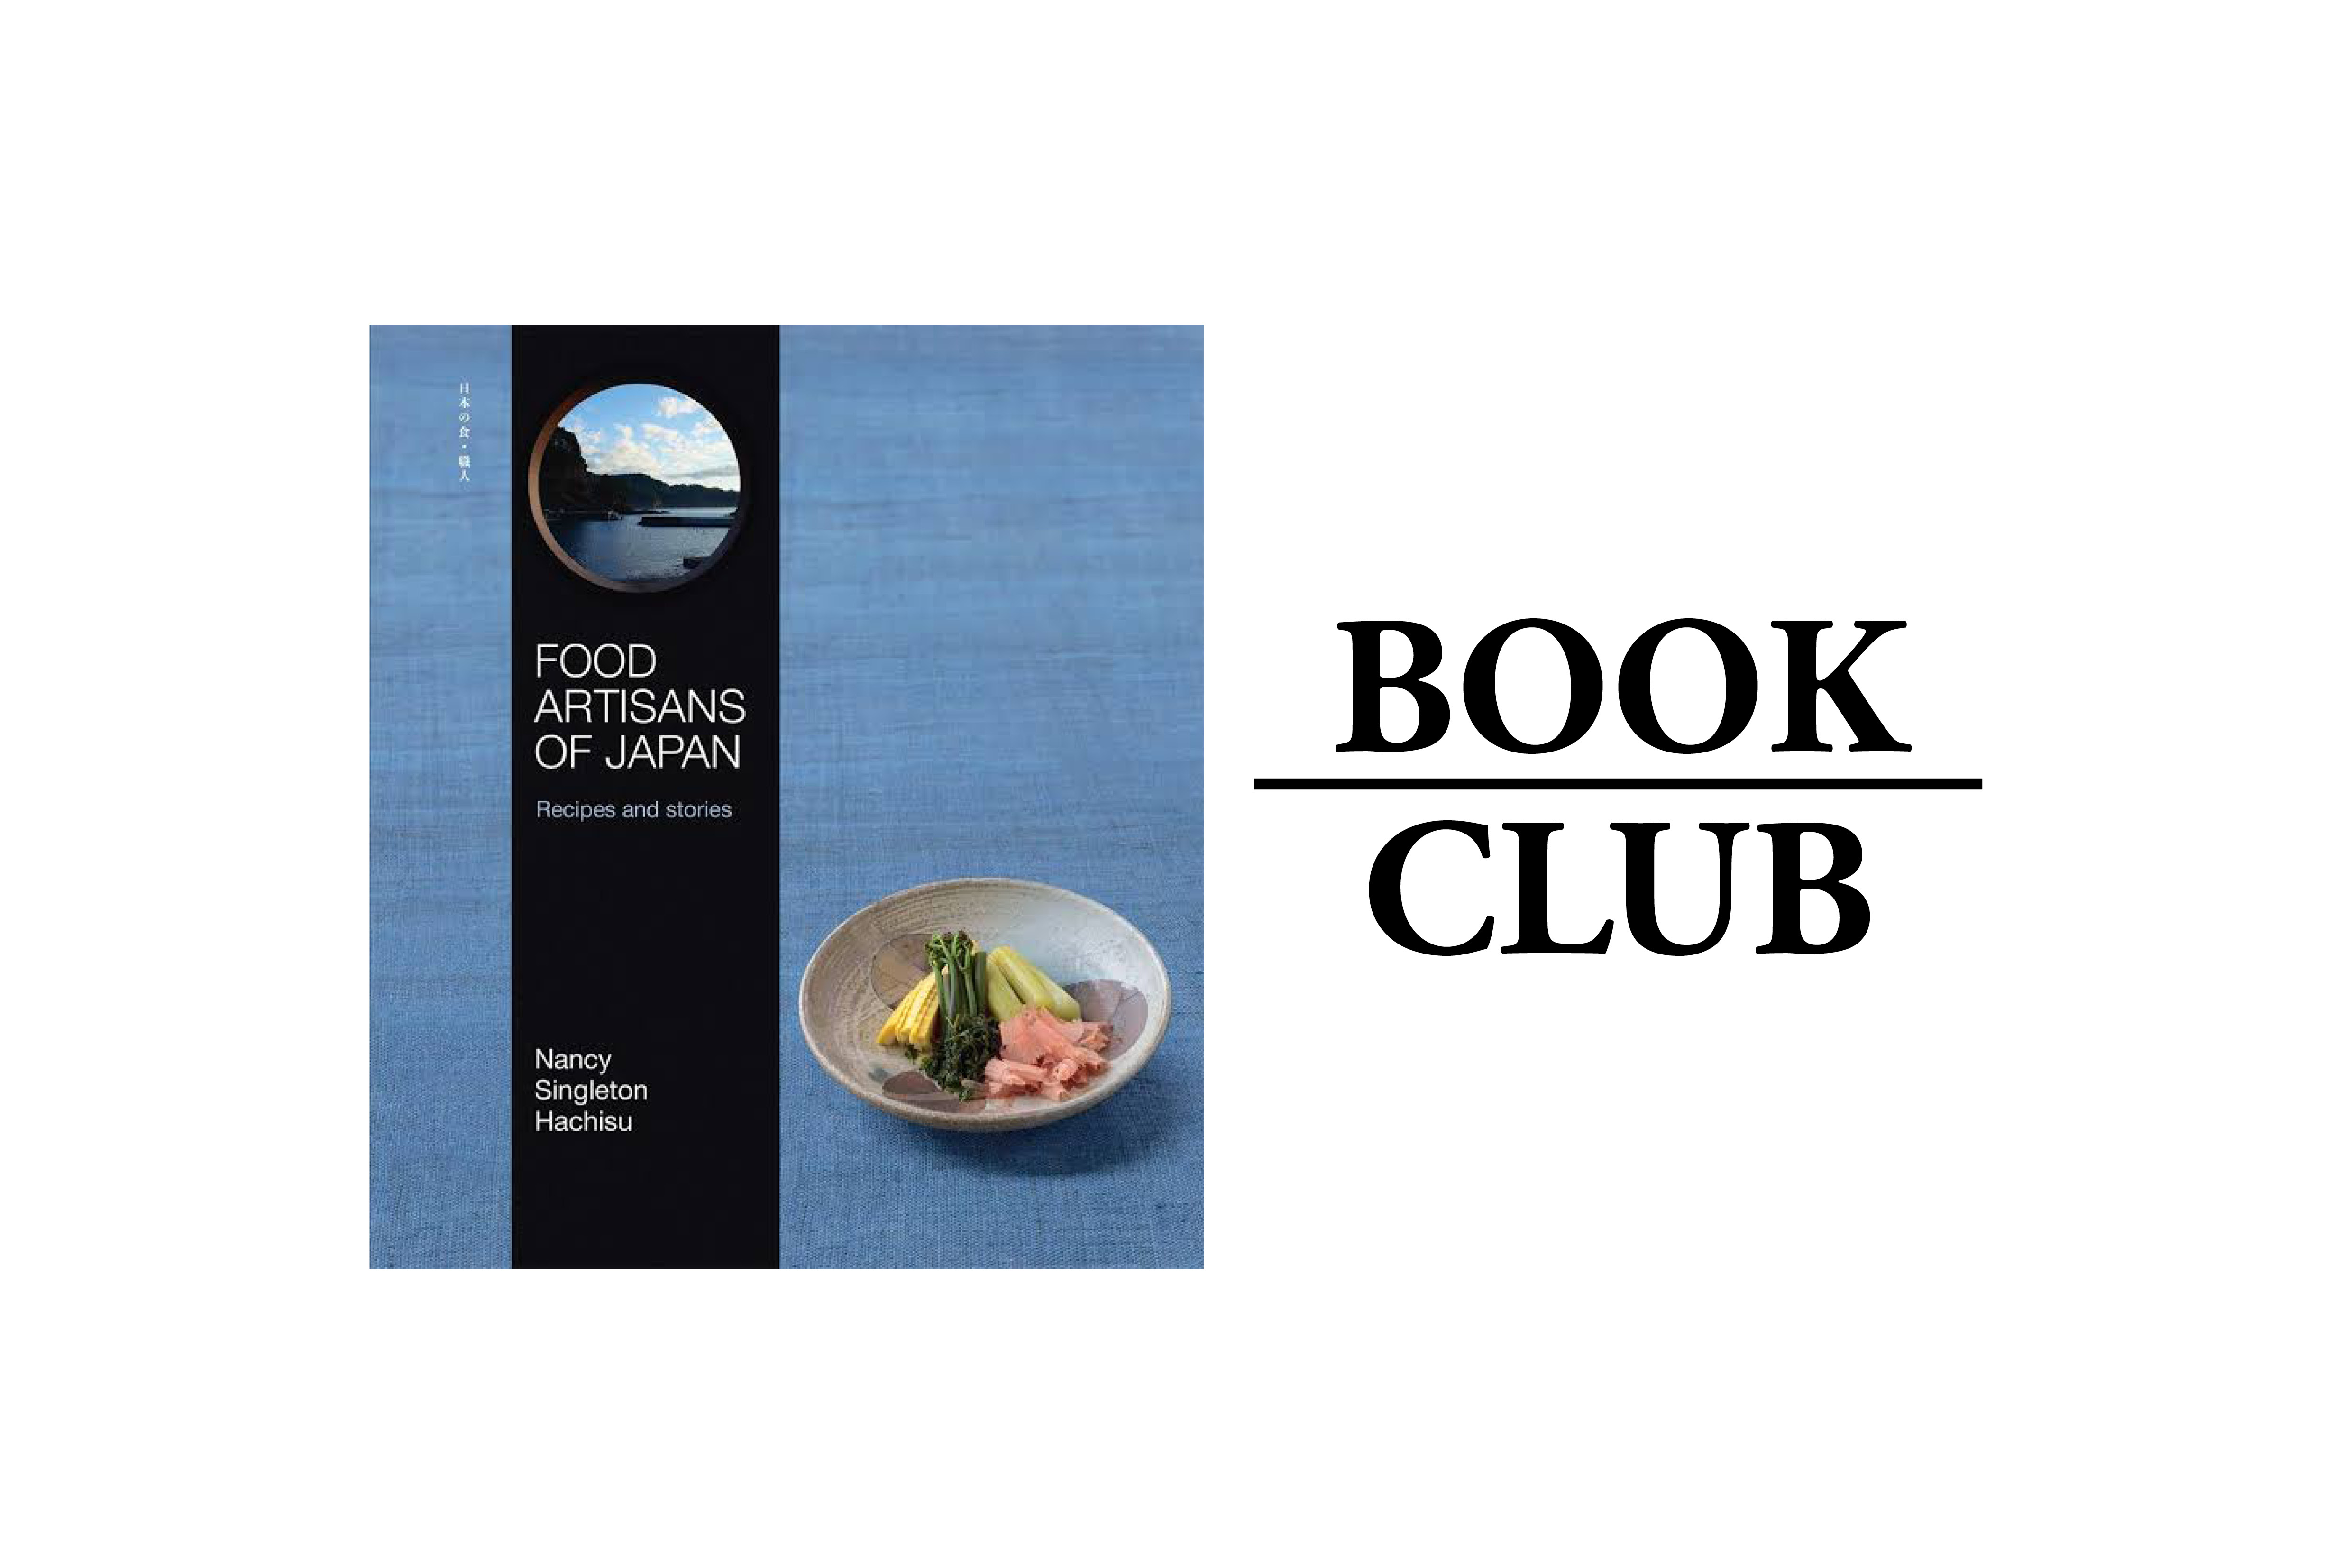 Food Artisans of Japan book cover with BOOK CLUB text on right side